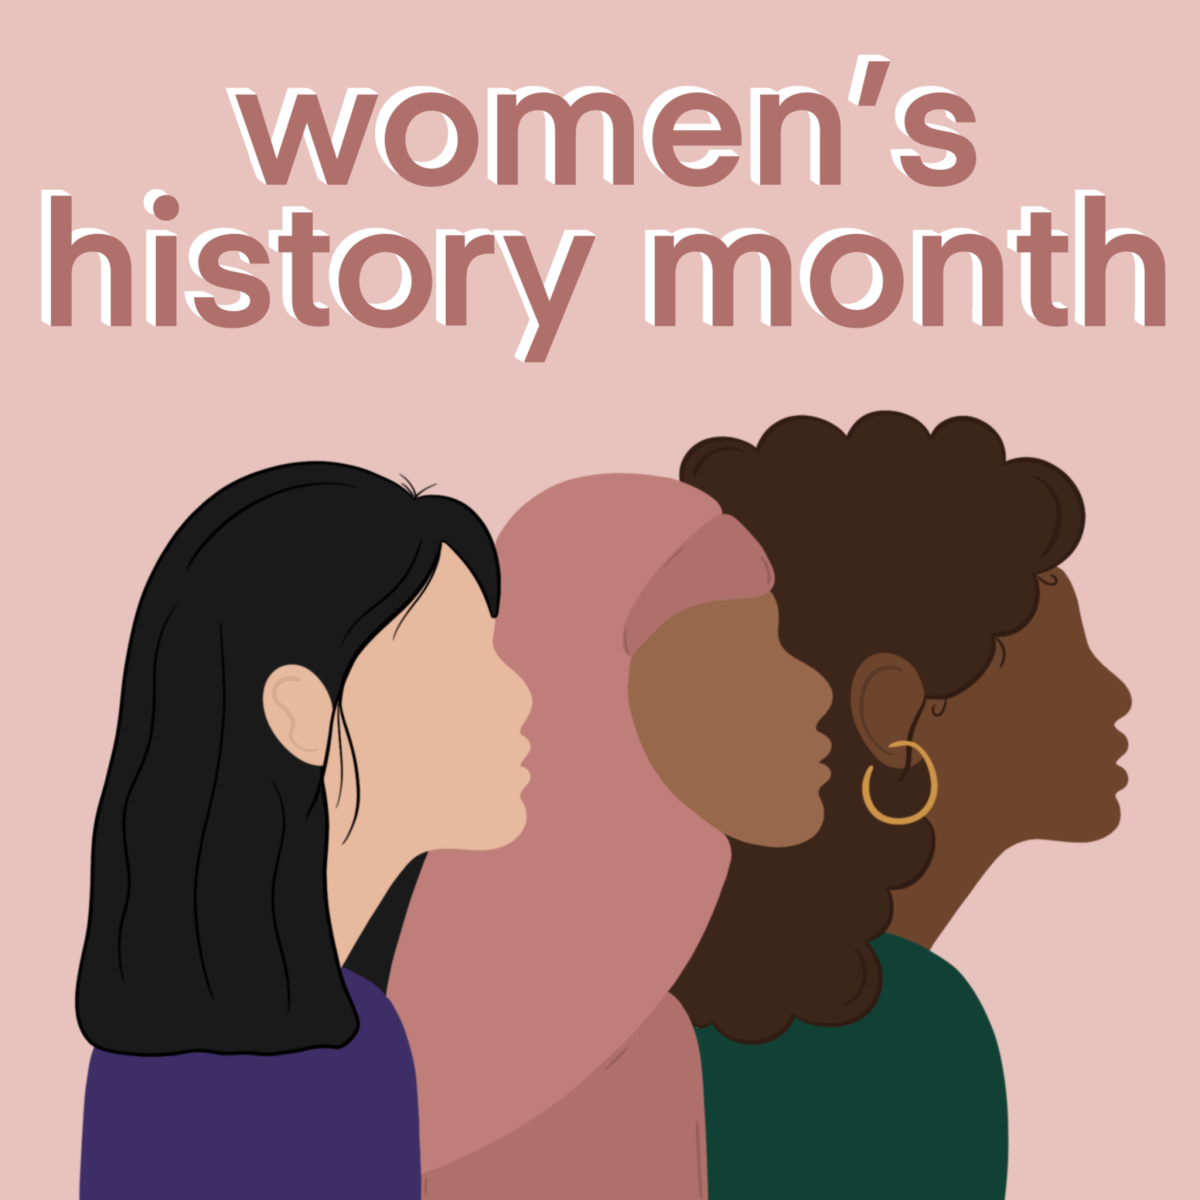 March+1+marks+the+beginning+of+Womens+History+Month%2C+a+month+long+celebration+of+the+contributions+of+women+in+history+and+society.%26%23160%3B